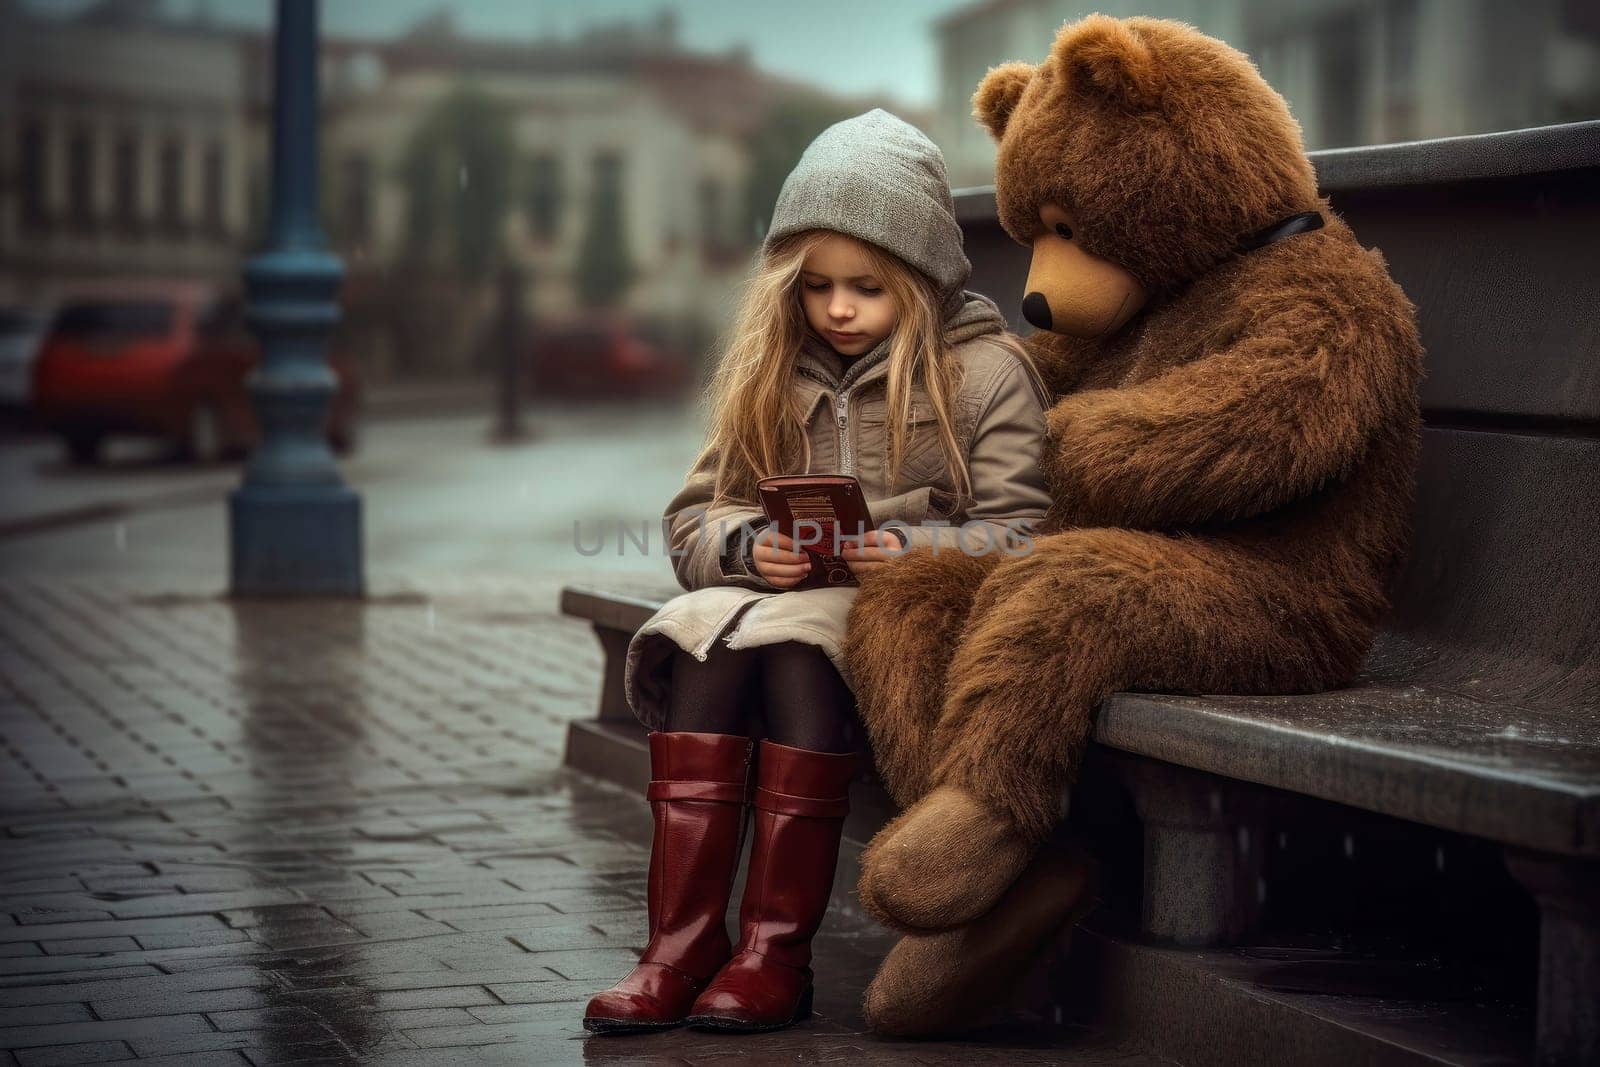 Modern Generation: Little Girl with Teddy Bear Engrossed in Smartphone by pippocarlot